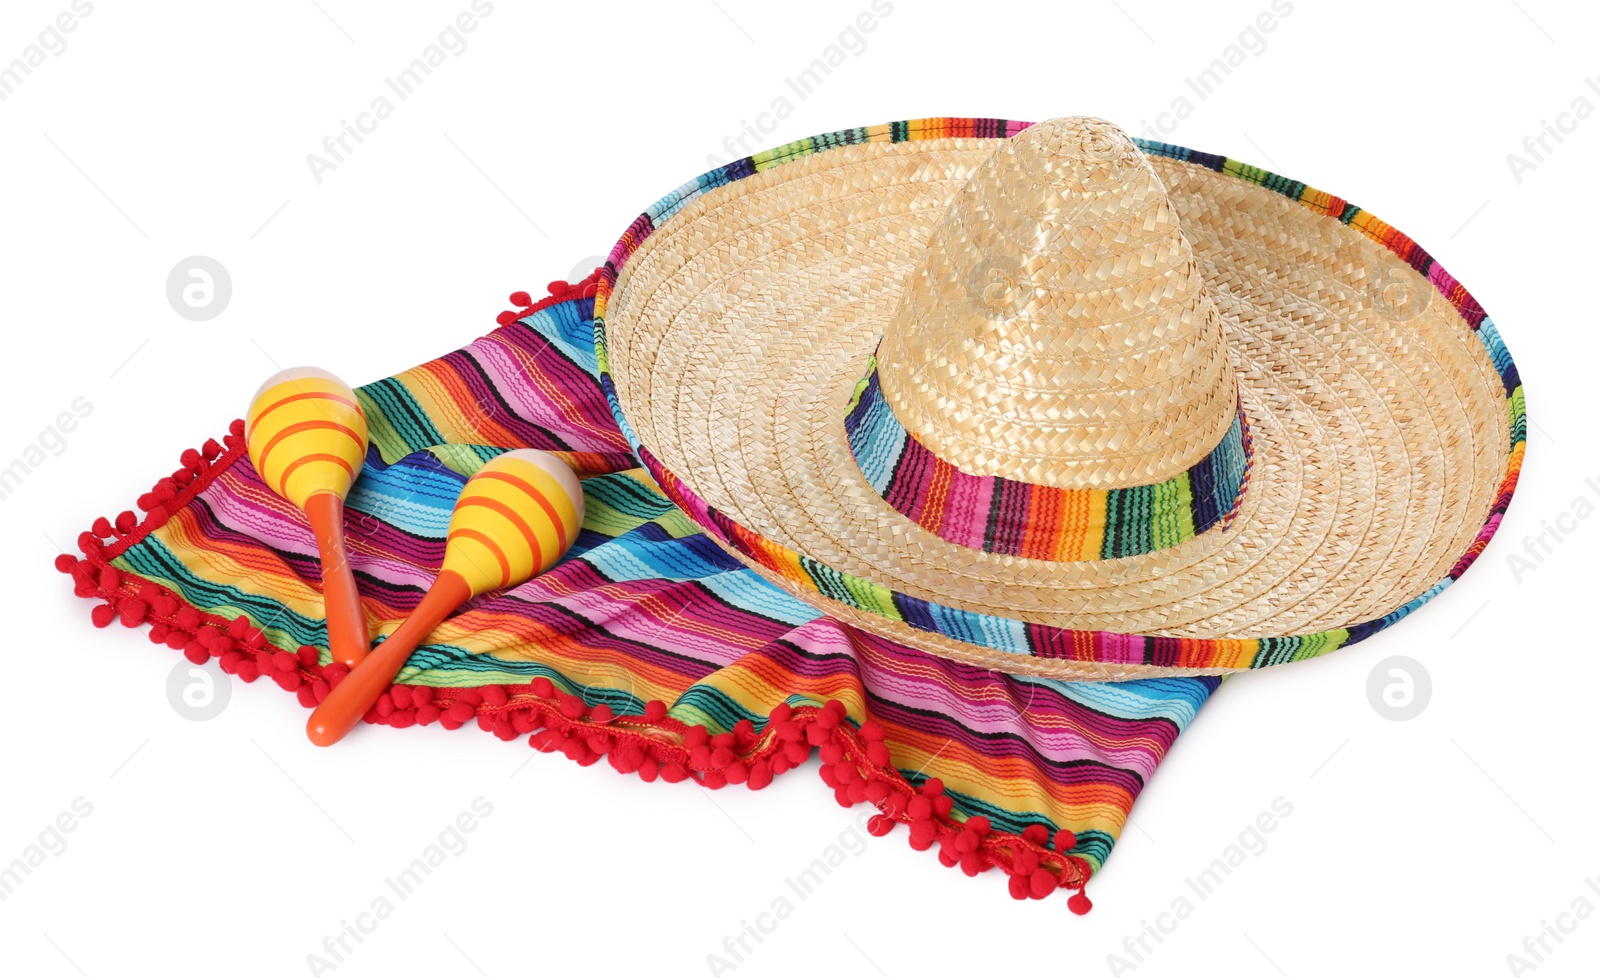 Photo of Mexican sombrero hat, maracas and colorful poncho isolated on white